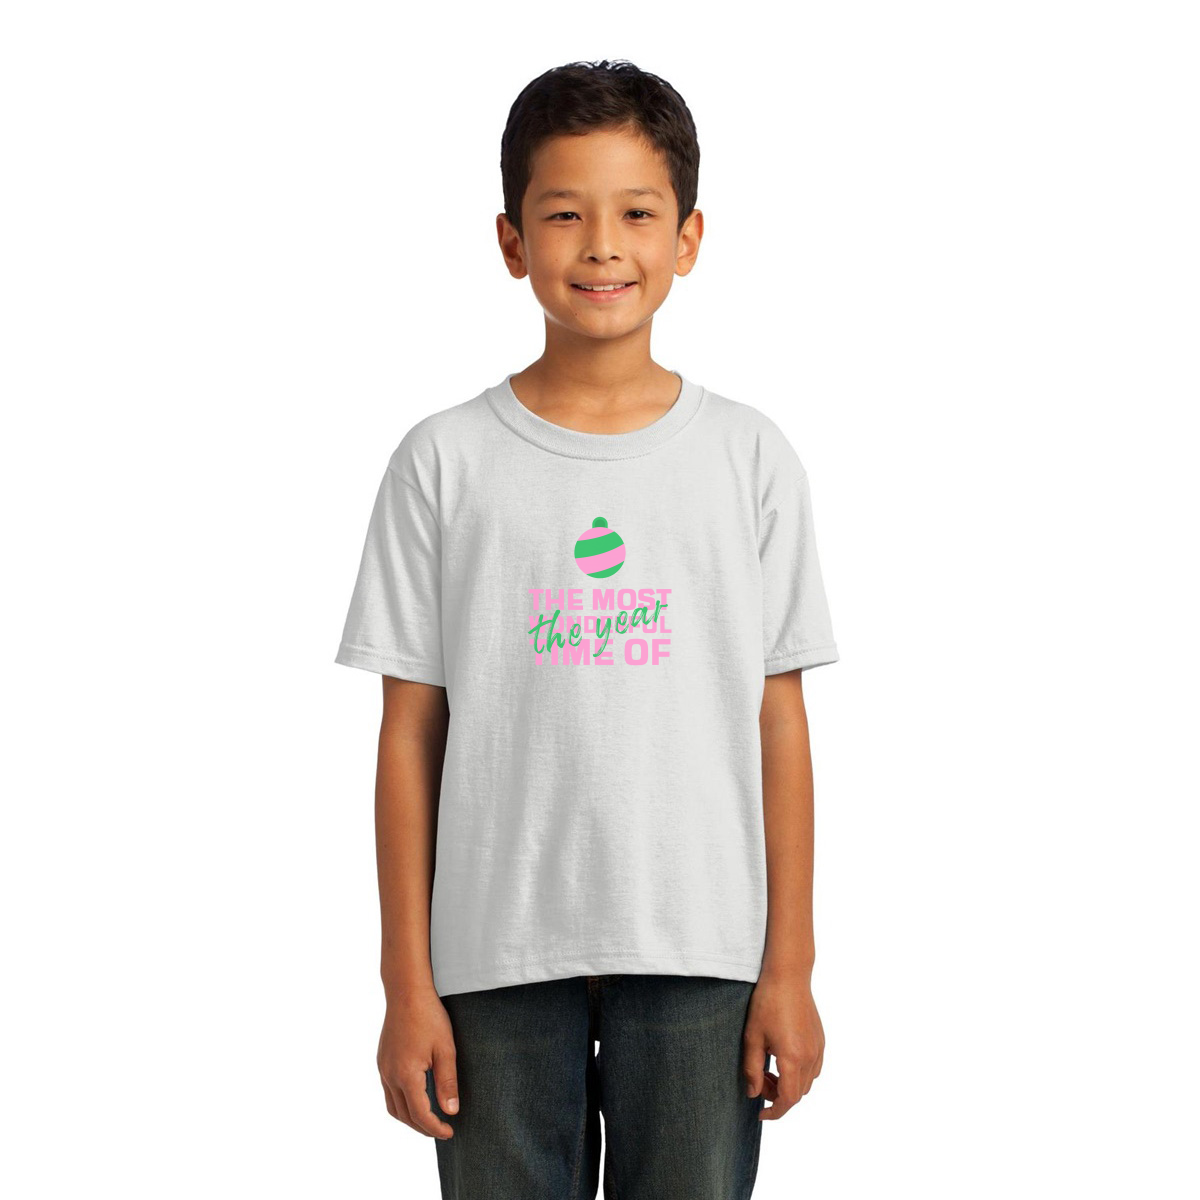 The Most Wonderful Time of the Year Kids T-shirt | White